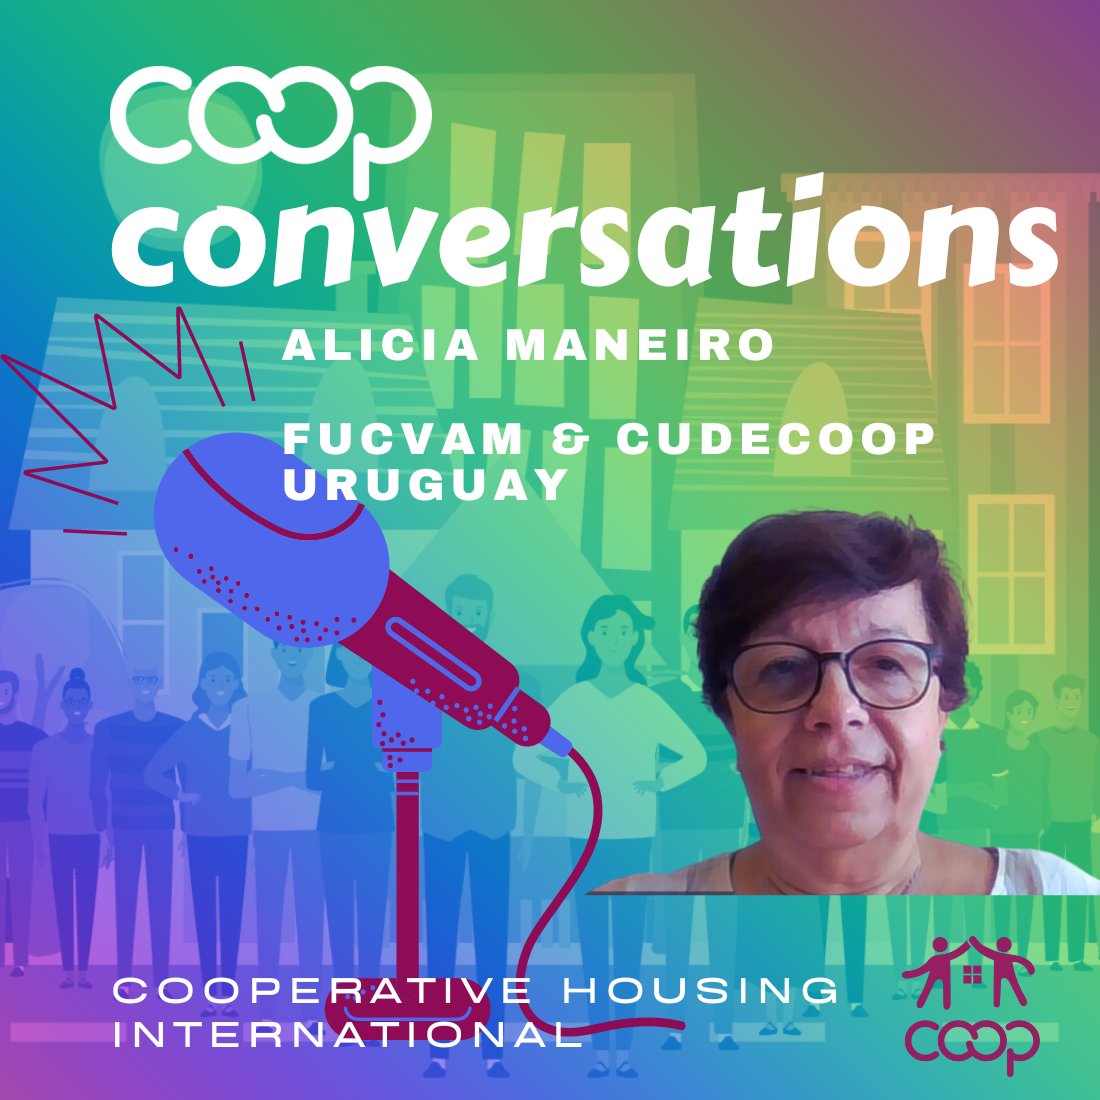 New Coop Conversations Podcast Episode Alicia Maneiro discusses the coop housing model in Uruguay & its unique feature influenced coop housing in Latin America and Europe. Watch the episode on YouTube or listen on Spotify & other platforms.